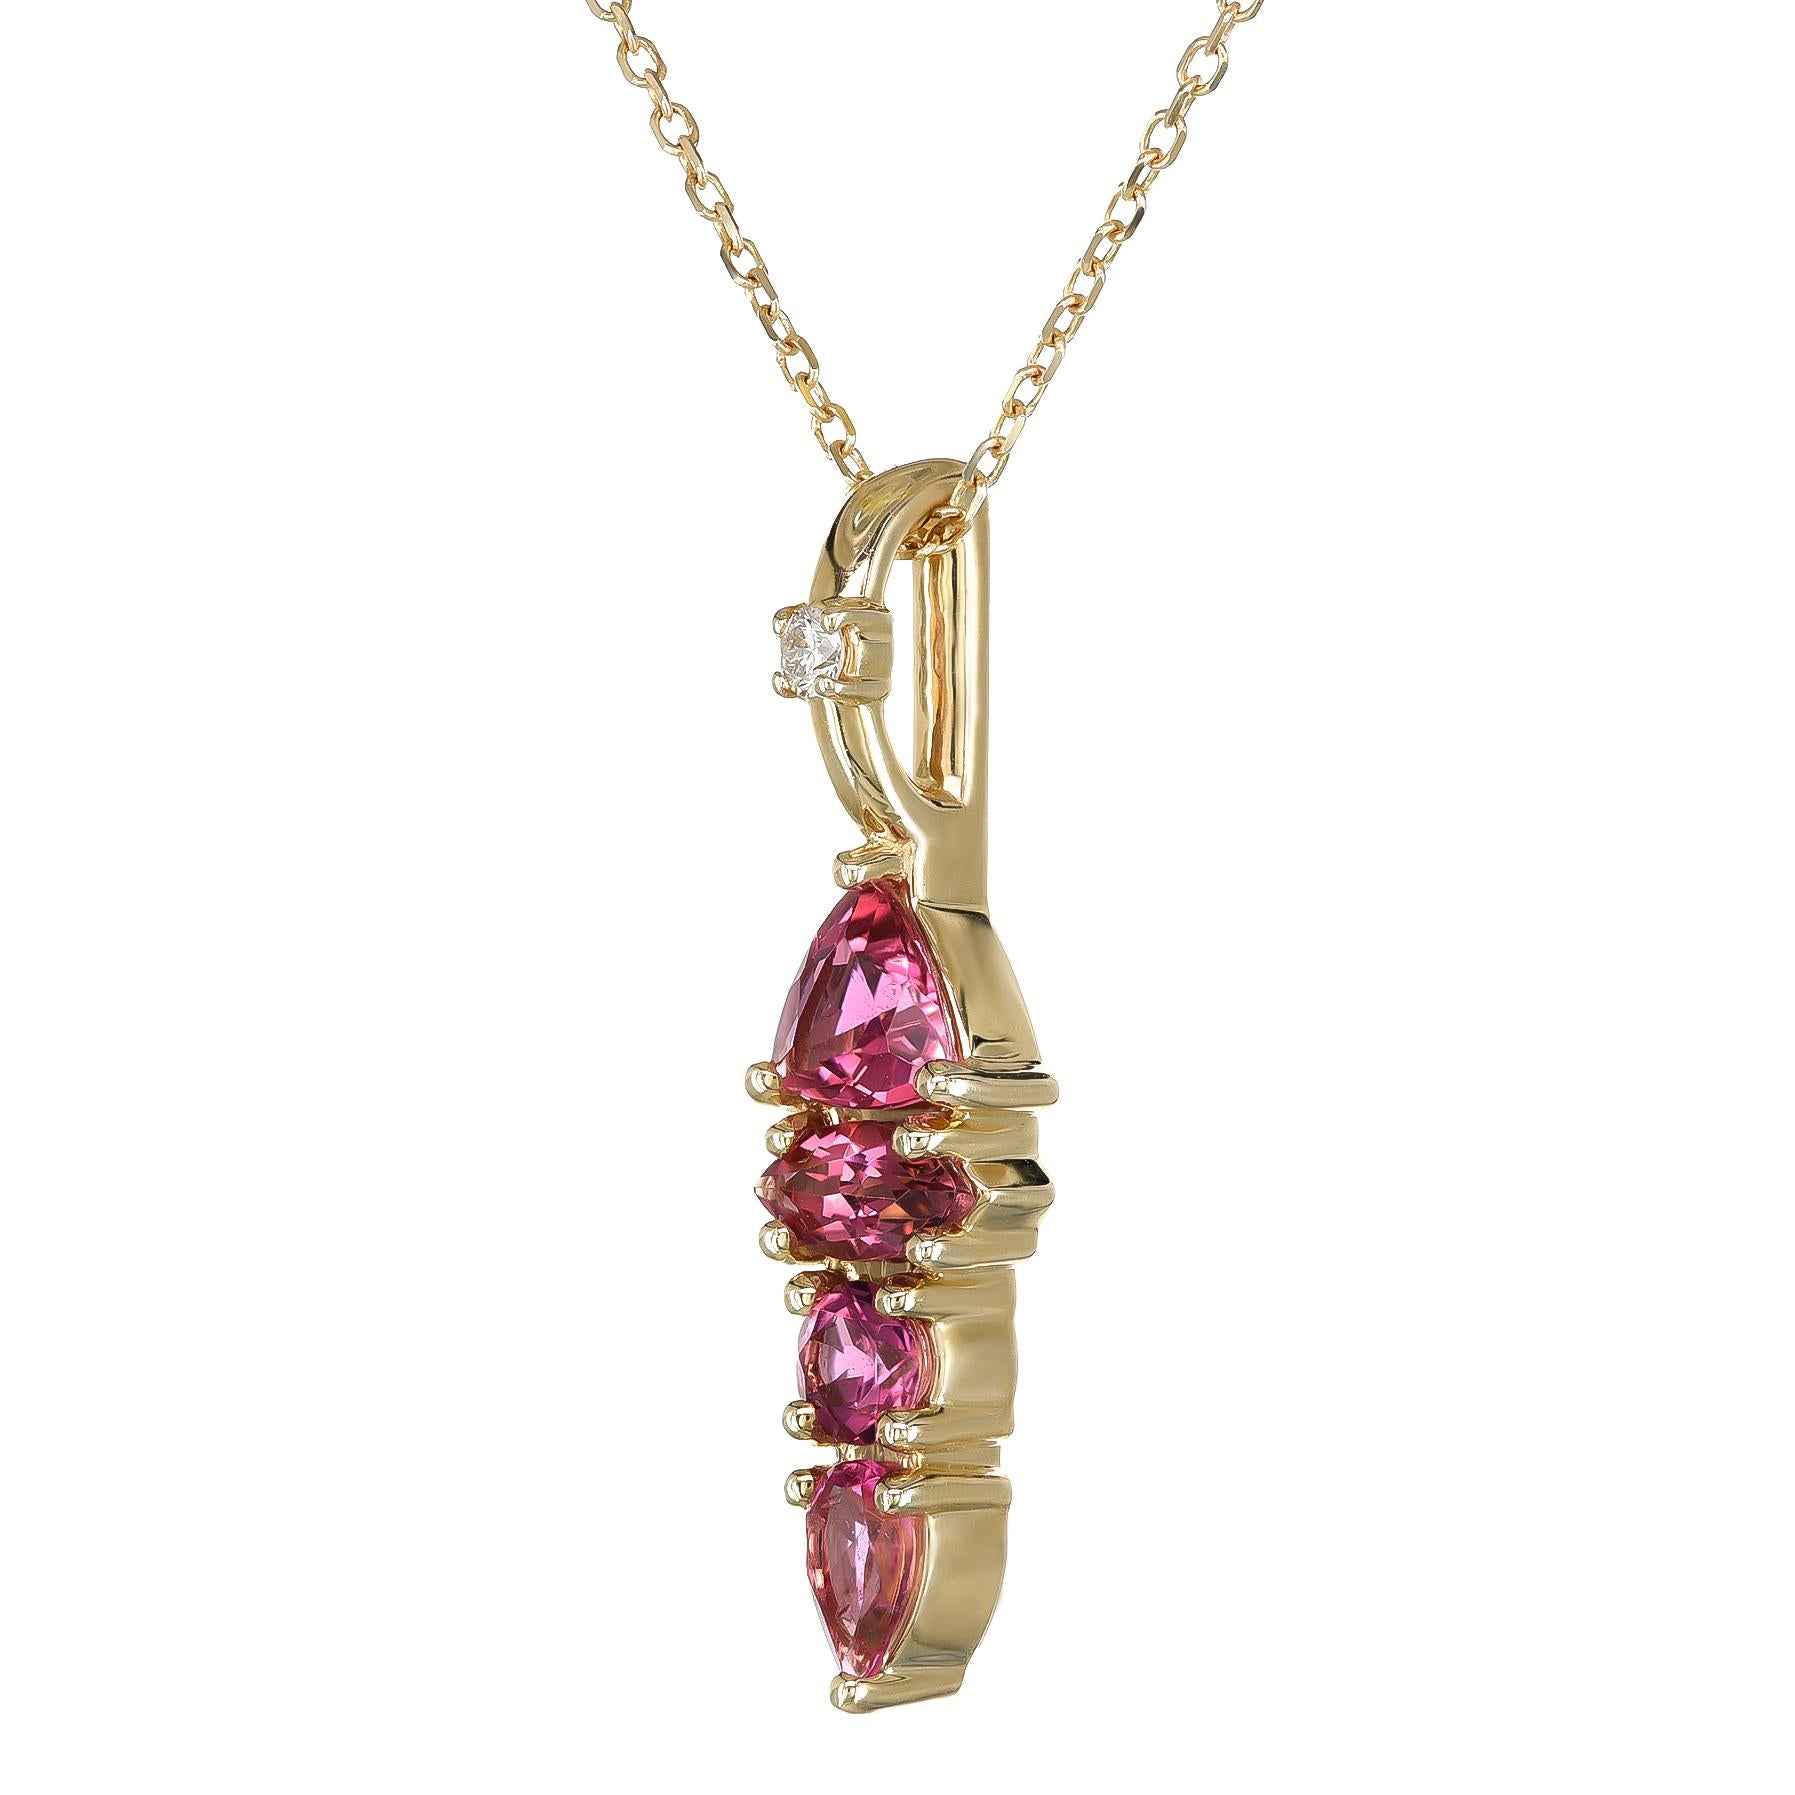 Discover the delicate allure of Pink Tourmaline, beautifully set in 14K yellow gold. This gemstone is a treasure for those who appreciate the subtle yet vibrant colors of nature's artistry in their jewelry.

Metal Type: Exquisitely crafted in 14K